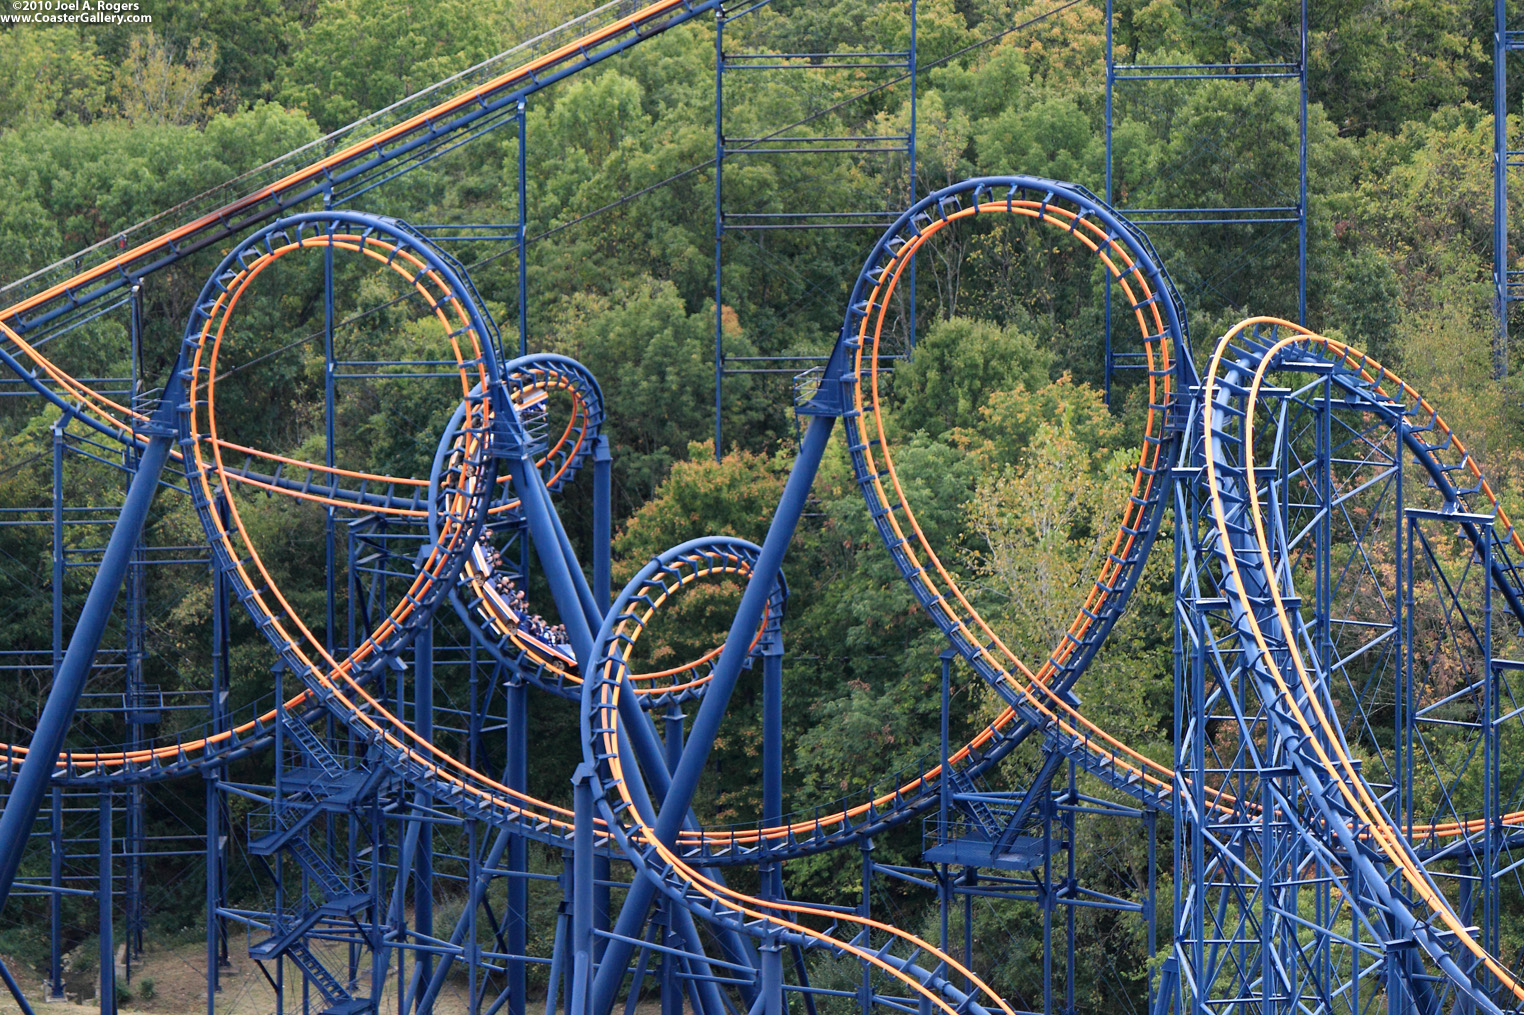 Vortex - The looping roller coaster at Kings Island in Ohio